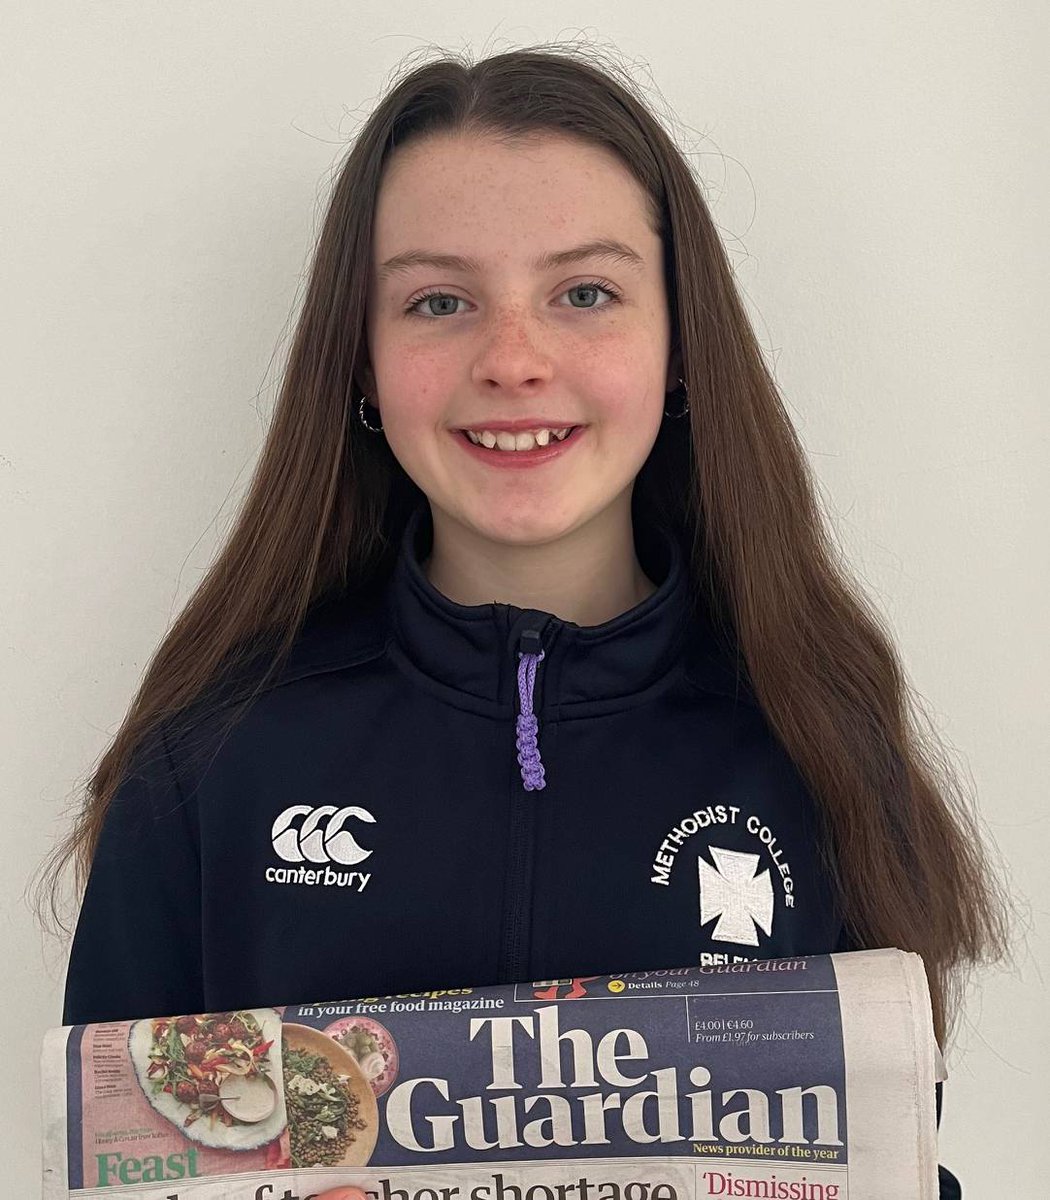 Congratulations to Anna Williams, 1R, who has had an article that she has written about nature published in The Guardian. The editor commended Anna’s piece as “really well-written, intelligent and lively”. Well done Anna! #MCB #Methody #MadetoLead